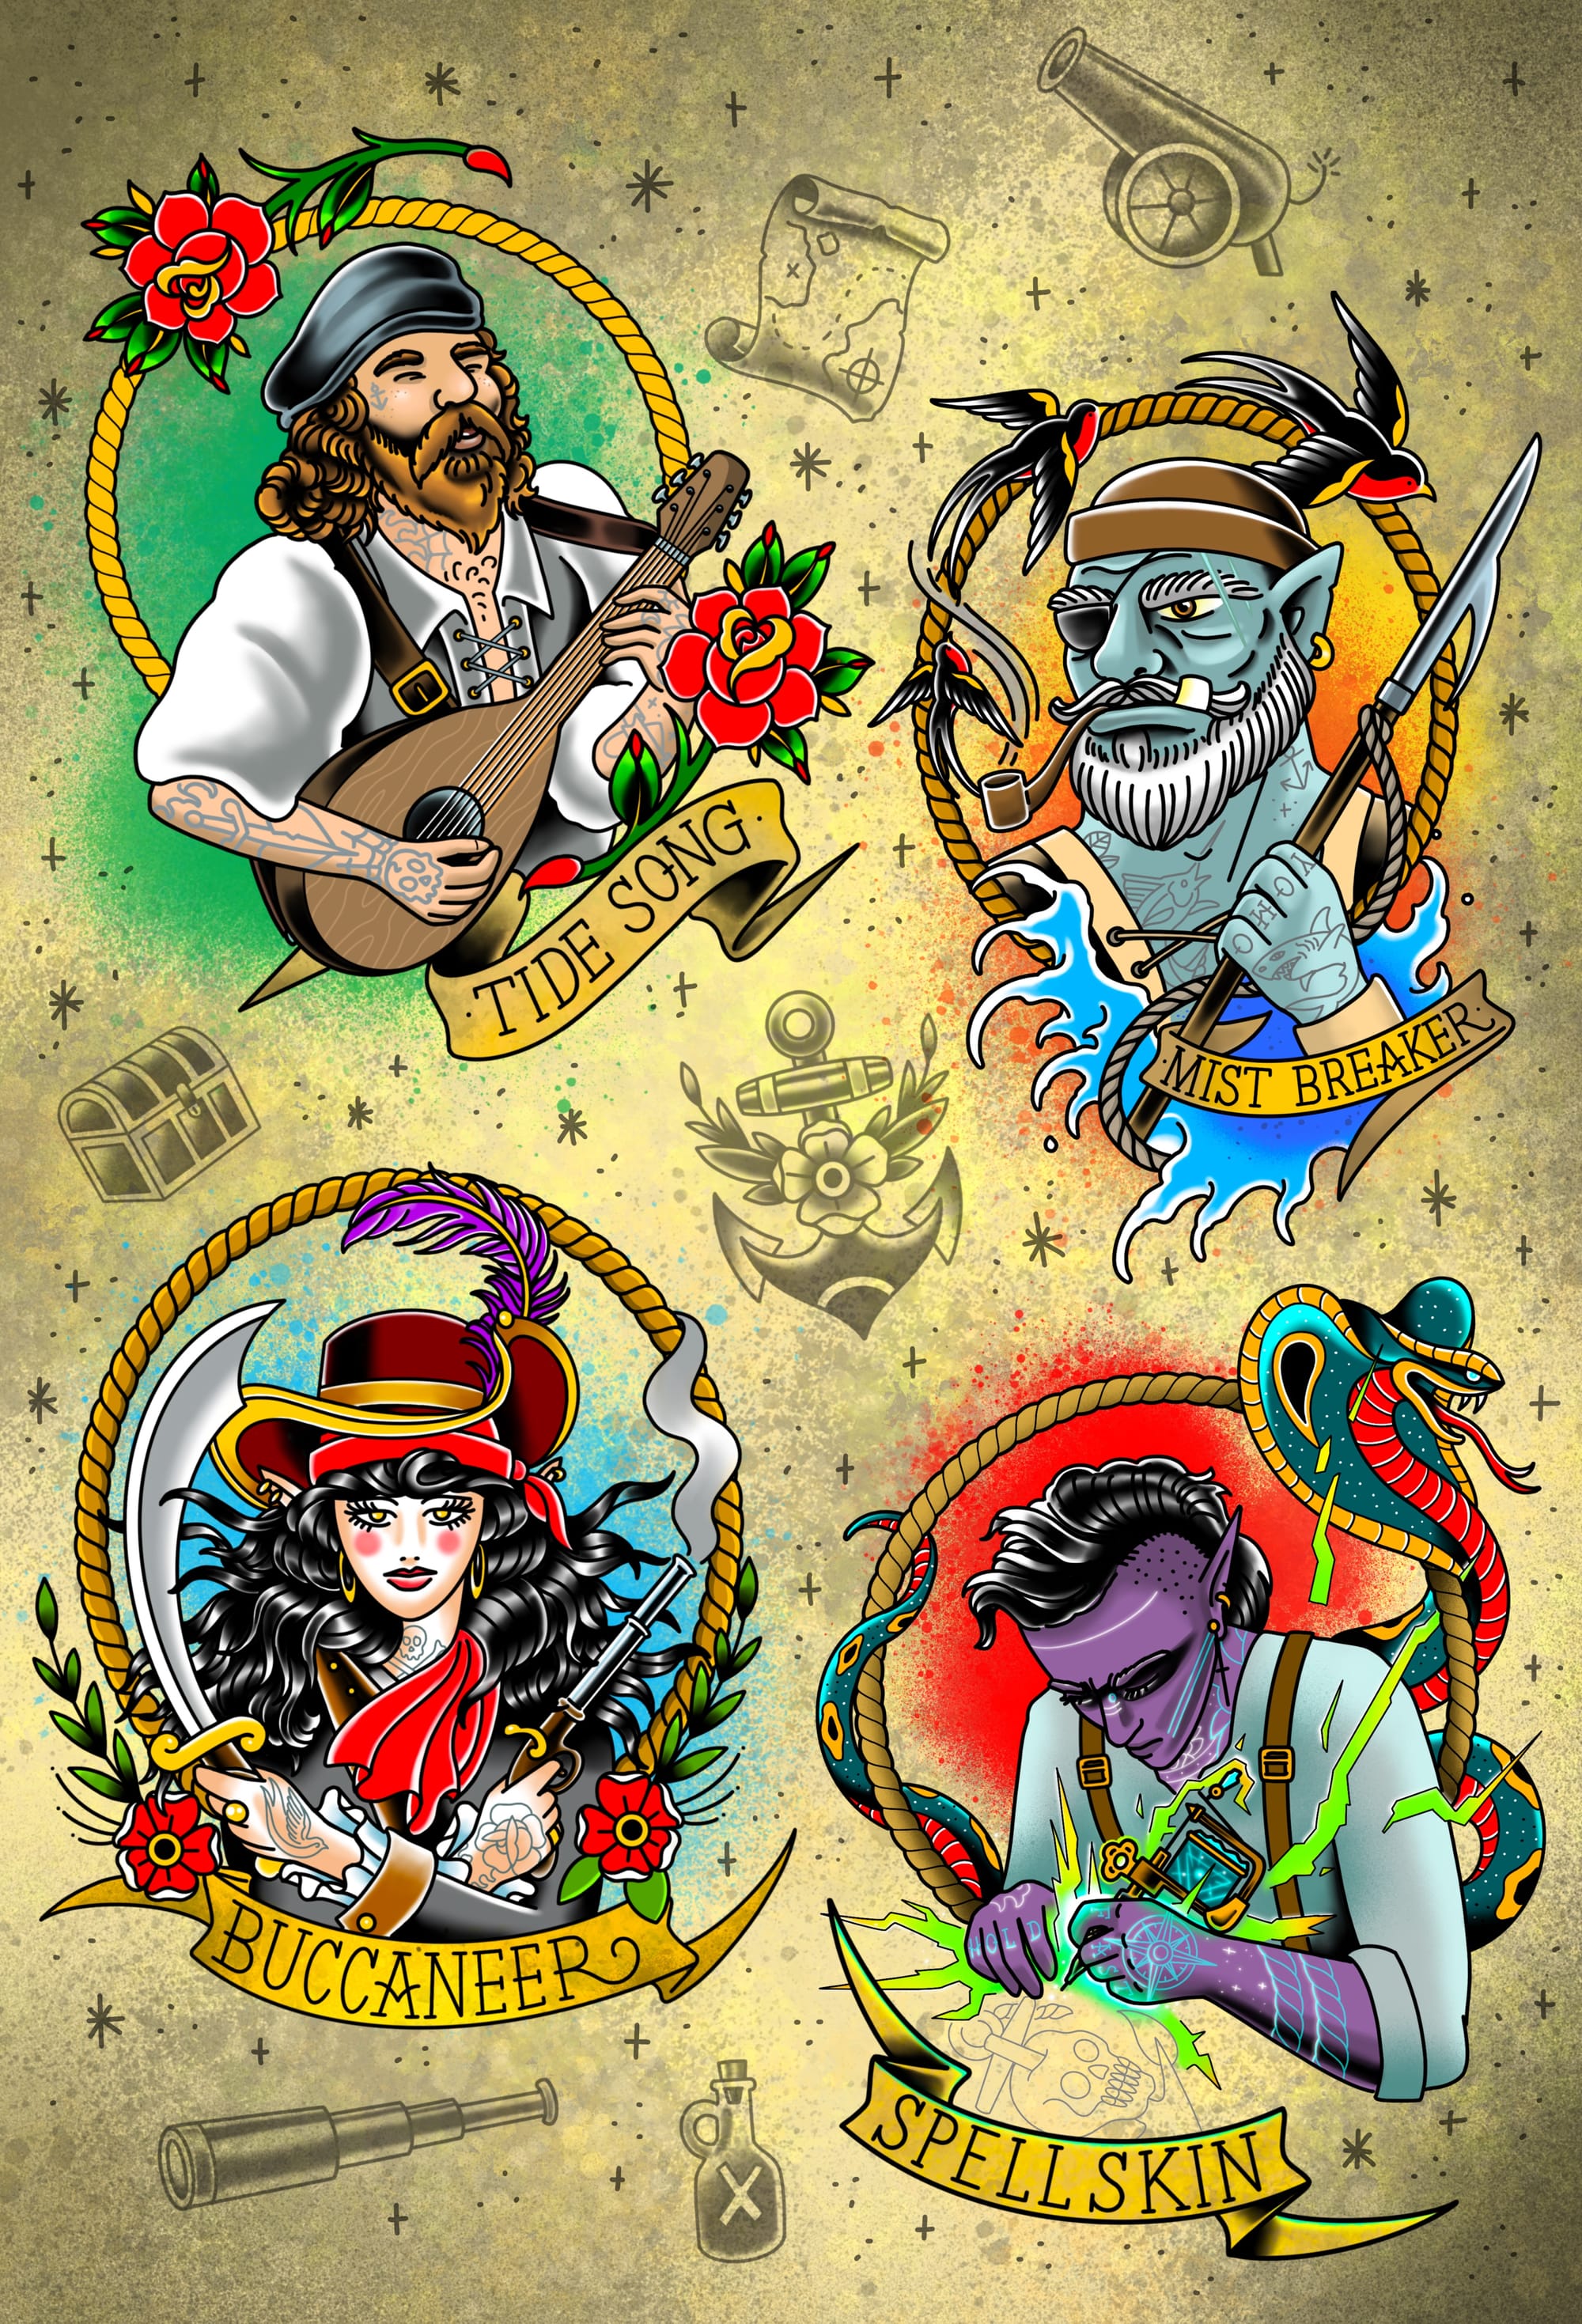 An American traditional tattoo flash sheet with art for the four subclasses: the College of Tide Song Bard, the Mist Breaker Ranger, the Buccaneer Fighter, the Spellskin Wizard.